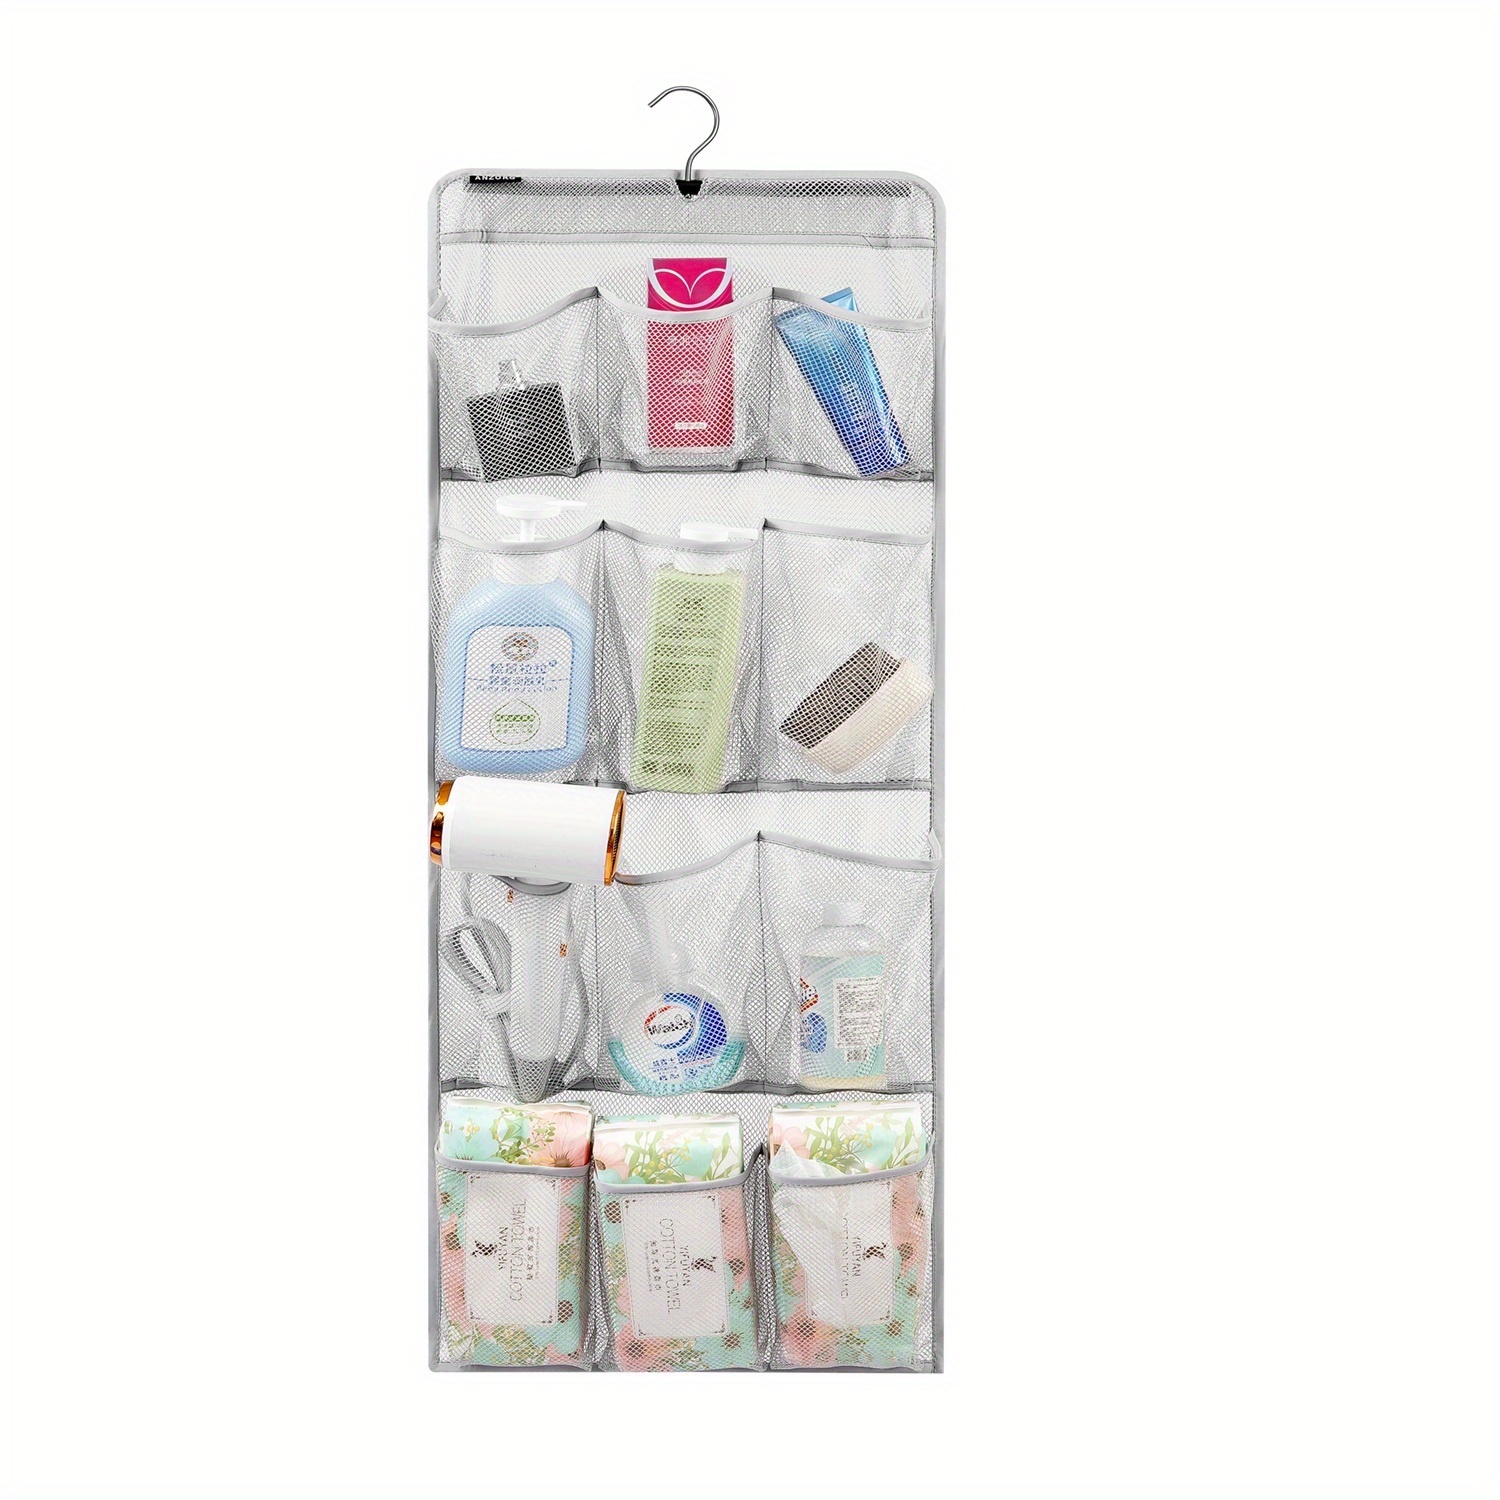 Mesh Shower Caddy Curtains Organizer - Hanging Bathroom Shower Curtain Rod / Liner Hooks Accessories with 6 Pockets Save Space in Small Bathroom Tub 4